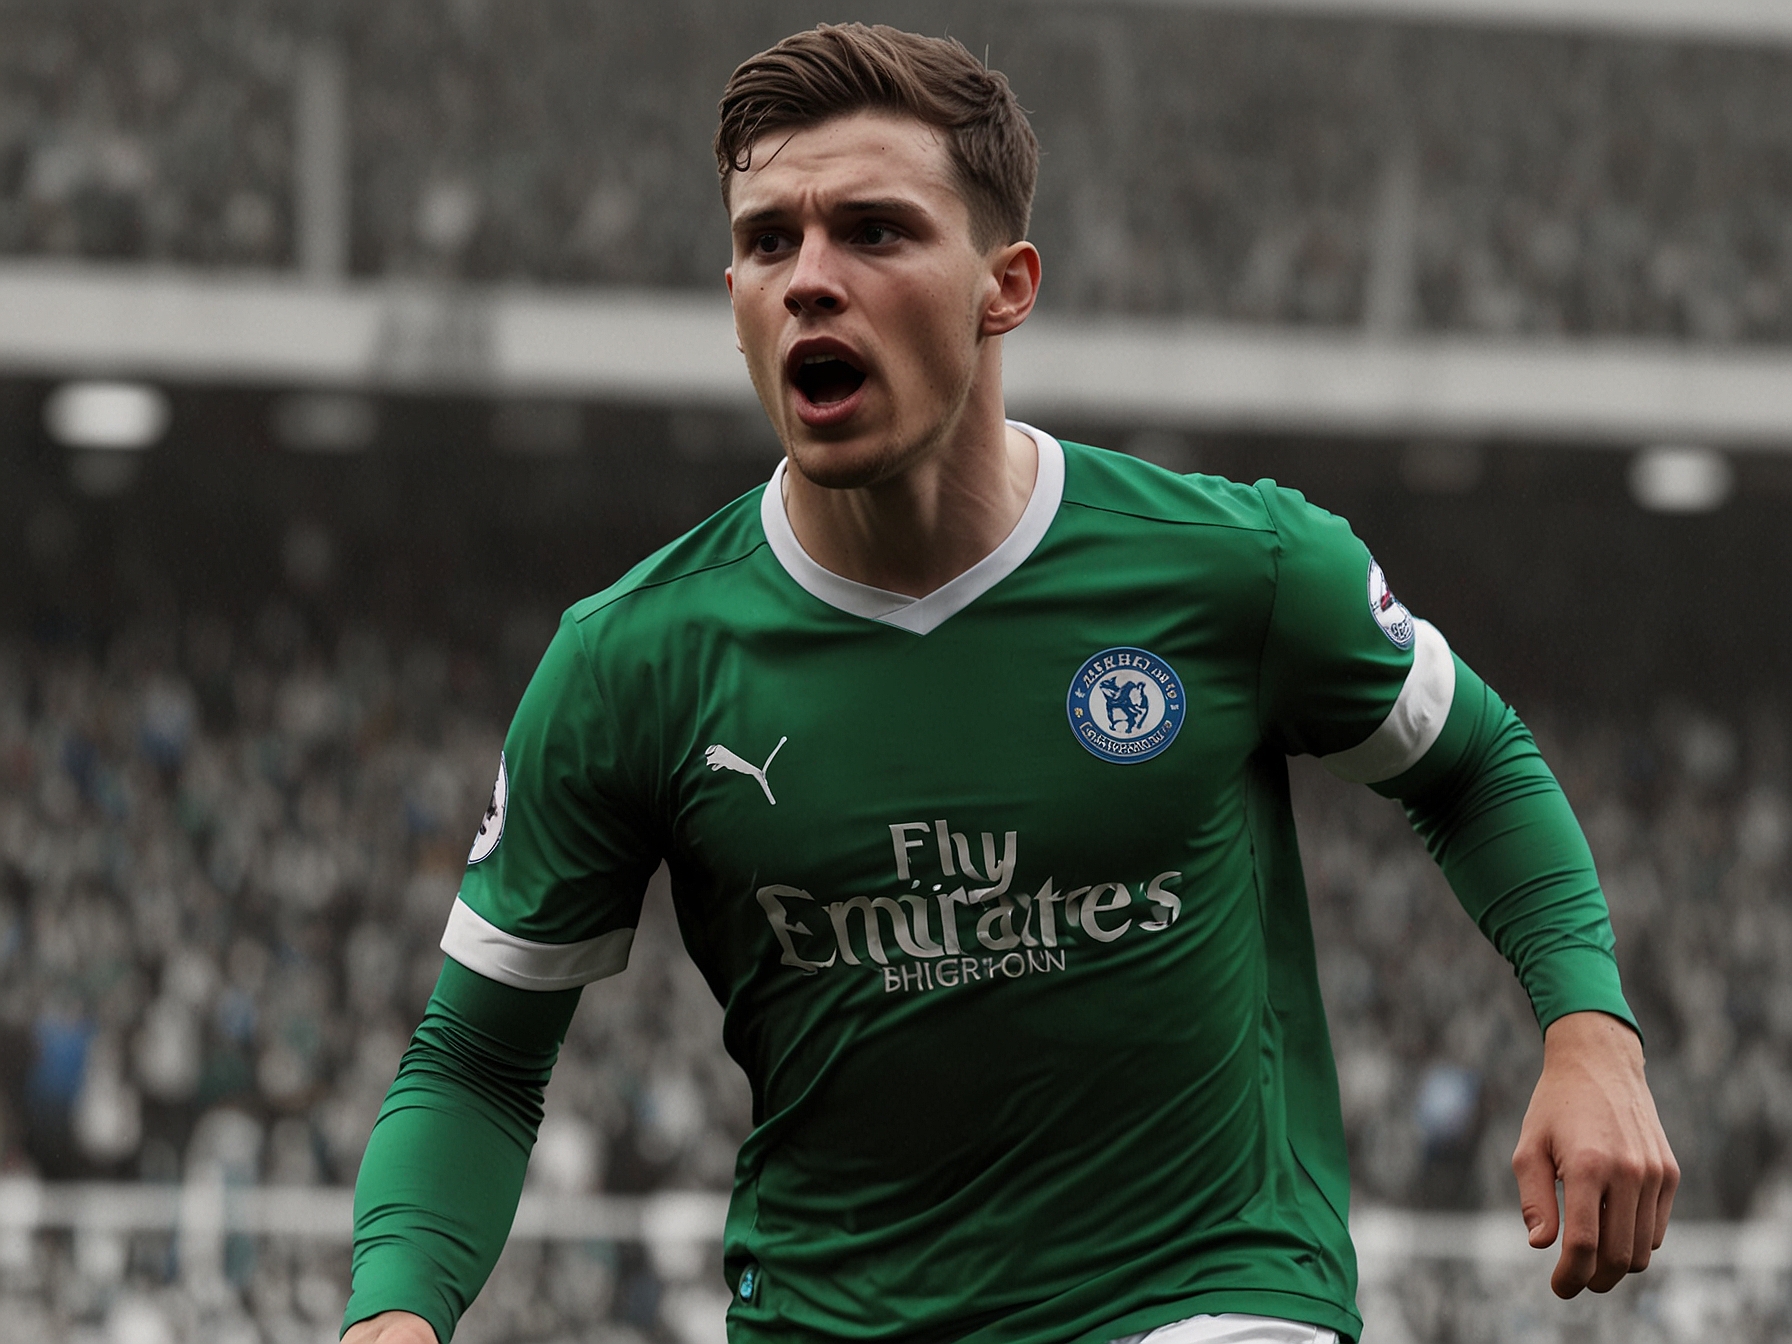 Evan Ferguson, the young Irish forward from Brighton & Hove Albion, showcasing his goal-scoring prowess in a Premier League match. Arsenal is now eyeing him as a potential signing.